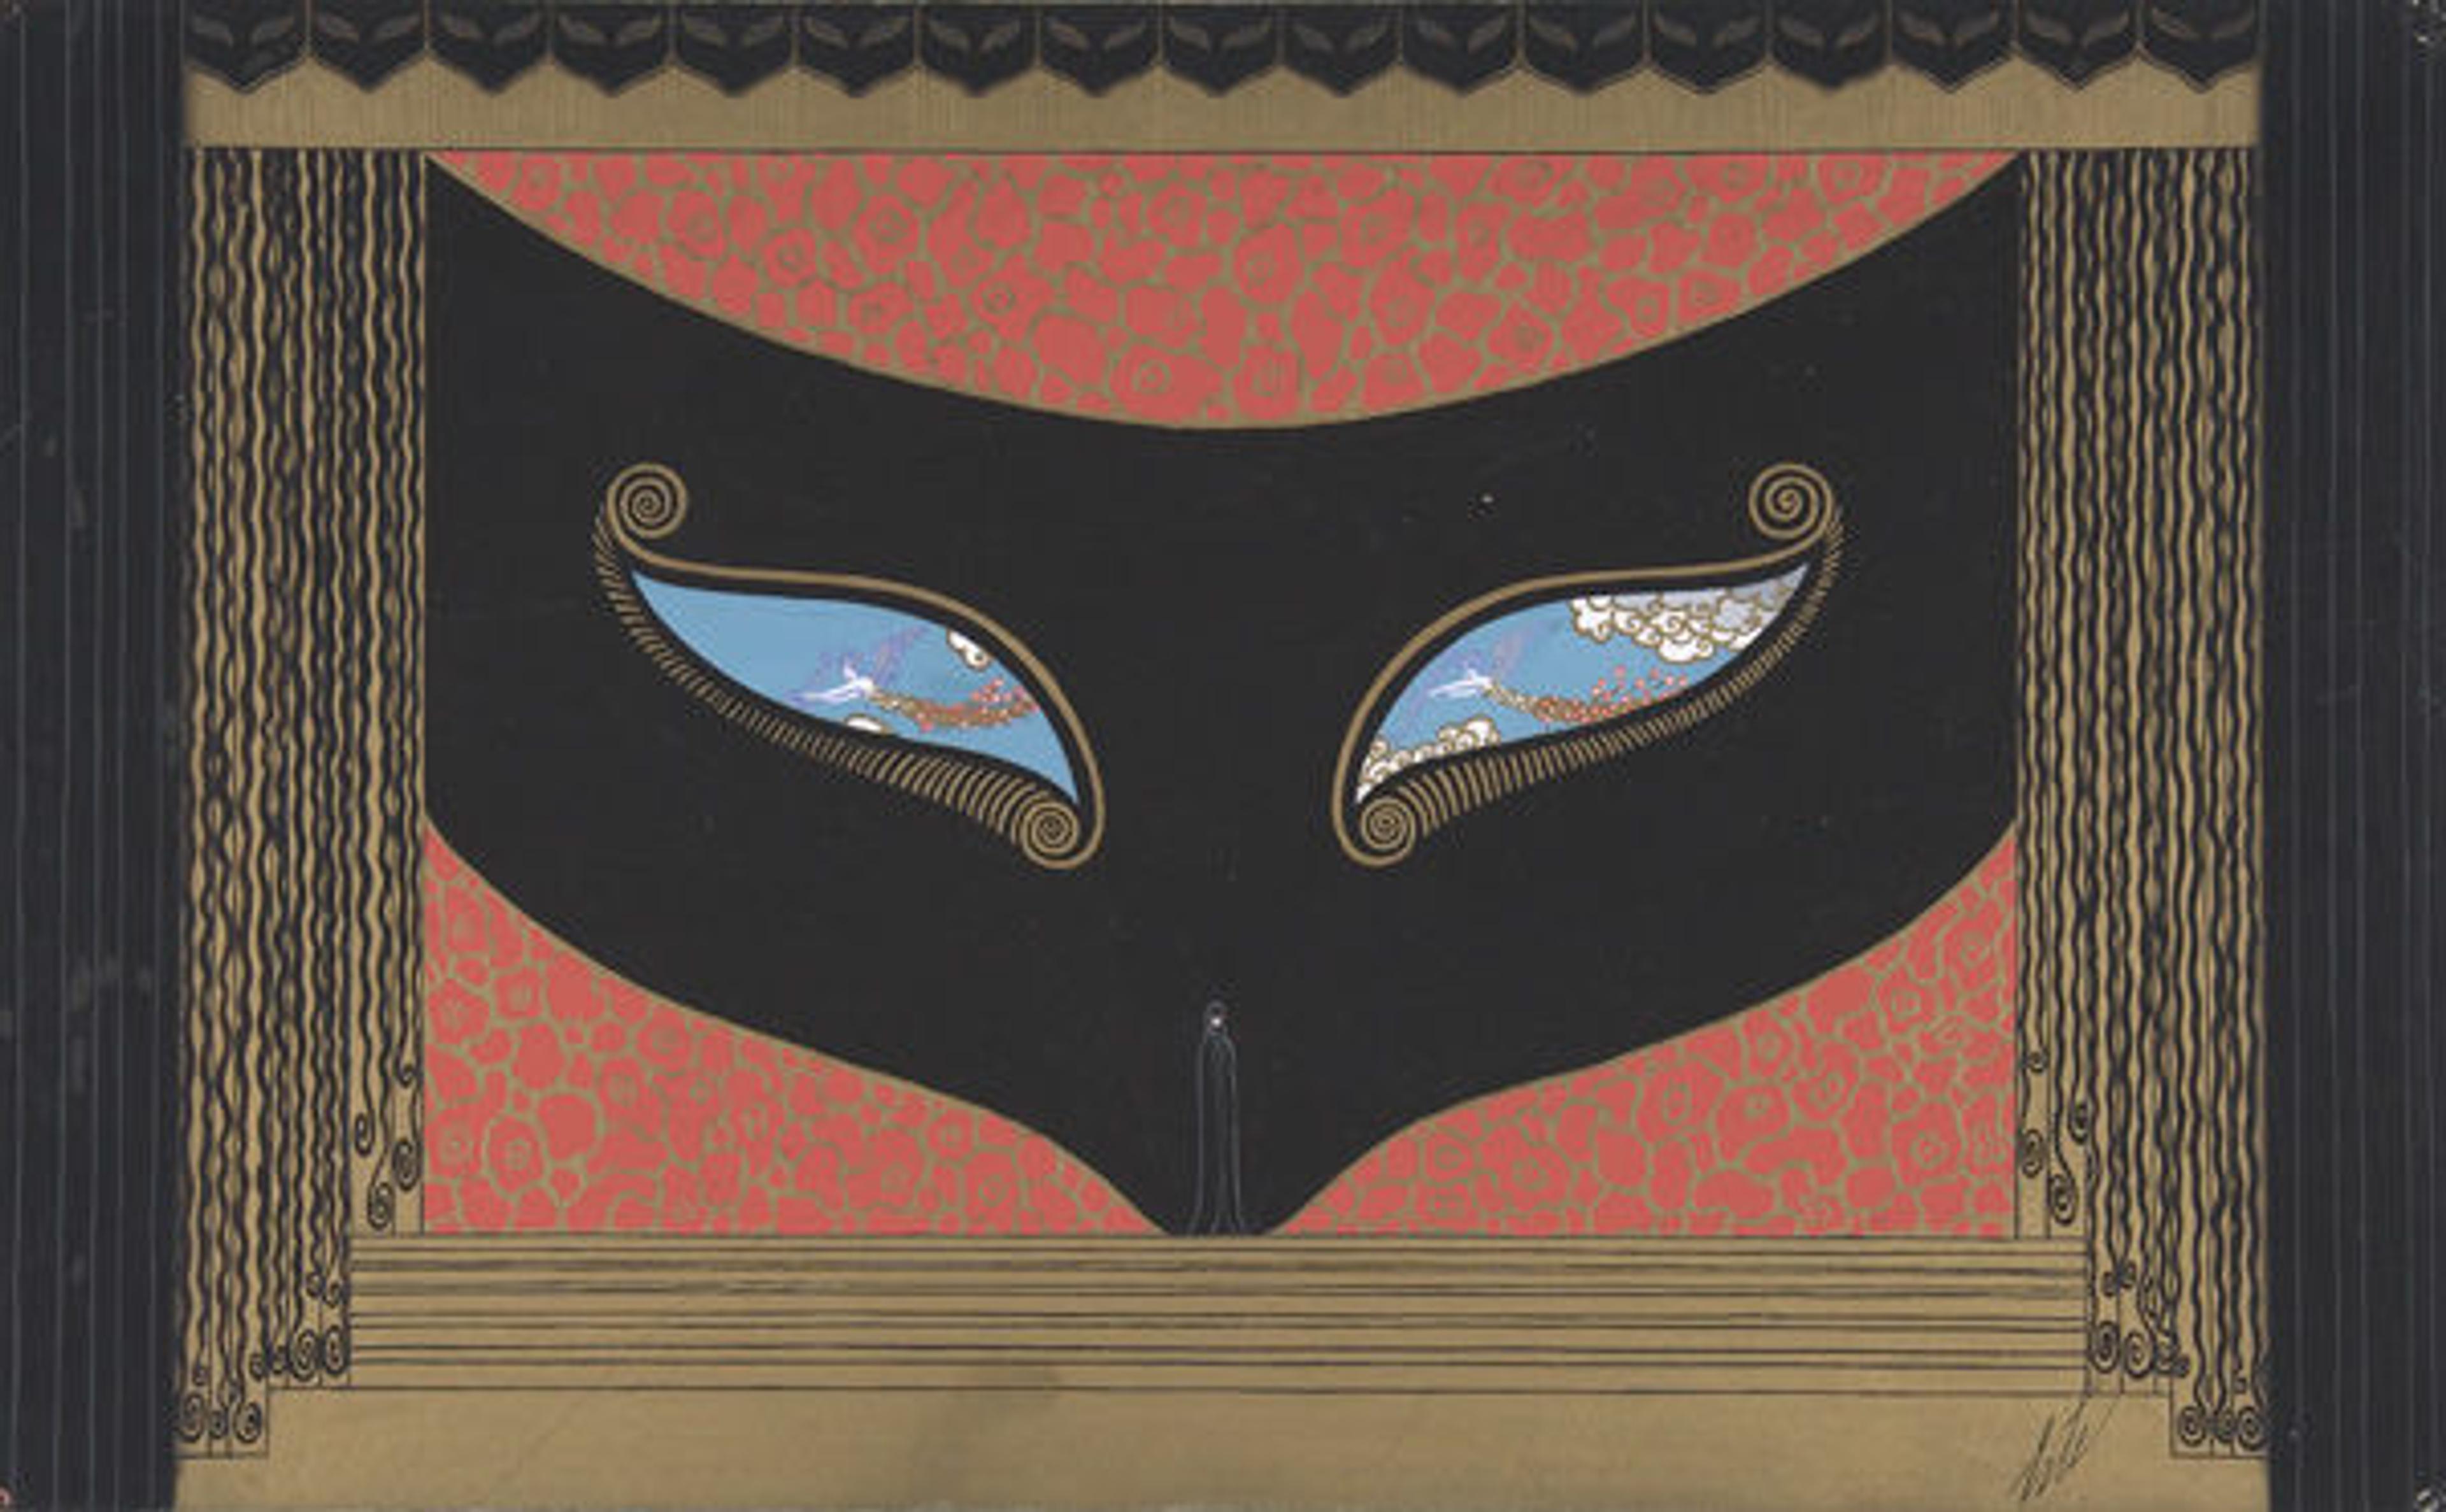 Fig. 1. Erté (Romain de Tirtoff) (French [born Russia], 1892–1990). Stage Set Design for "The Mask," George White's Scandals, New York, 1926. Gouache and metallic paint; 9 3/4 x 15 3/4 in. (24.8 x 40 cm). The Metropolitan Museum of Art, New York, Purchase, The Martin Foundation Inc. Gift, 1967 (67.762.192). © 2015 Artists Rights Society (ARS) New York